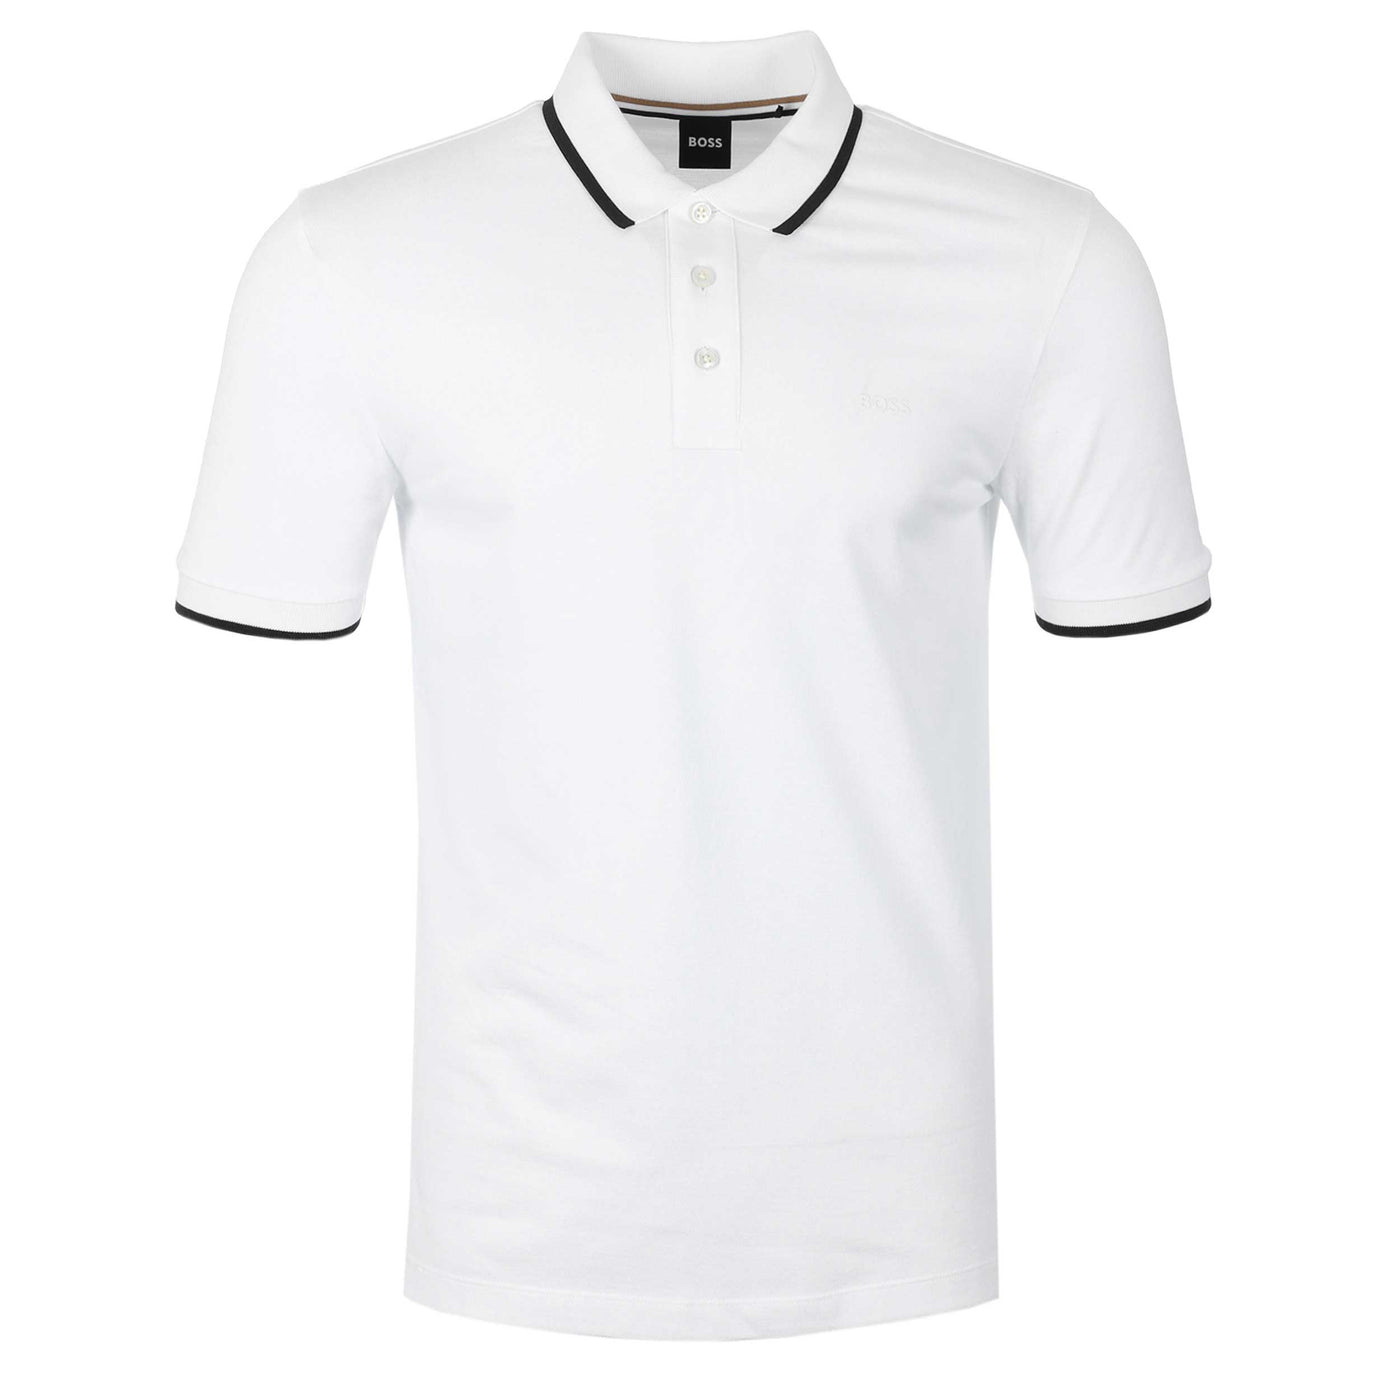 BOSS Parlay 190 Polo Shirt in White